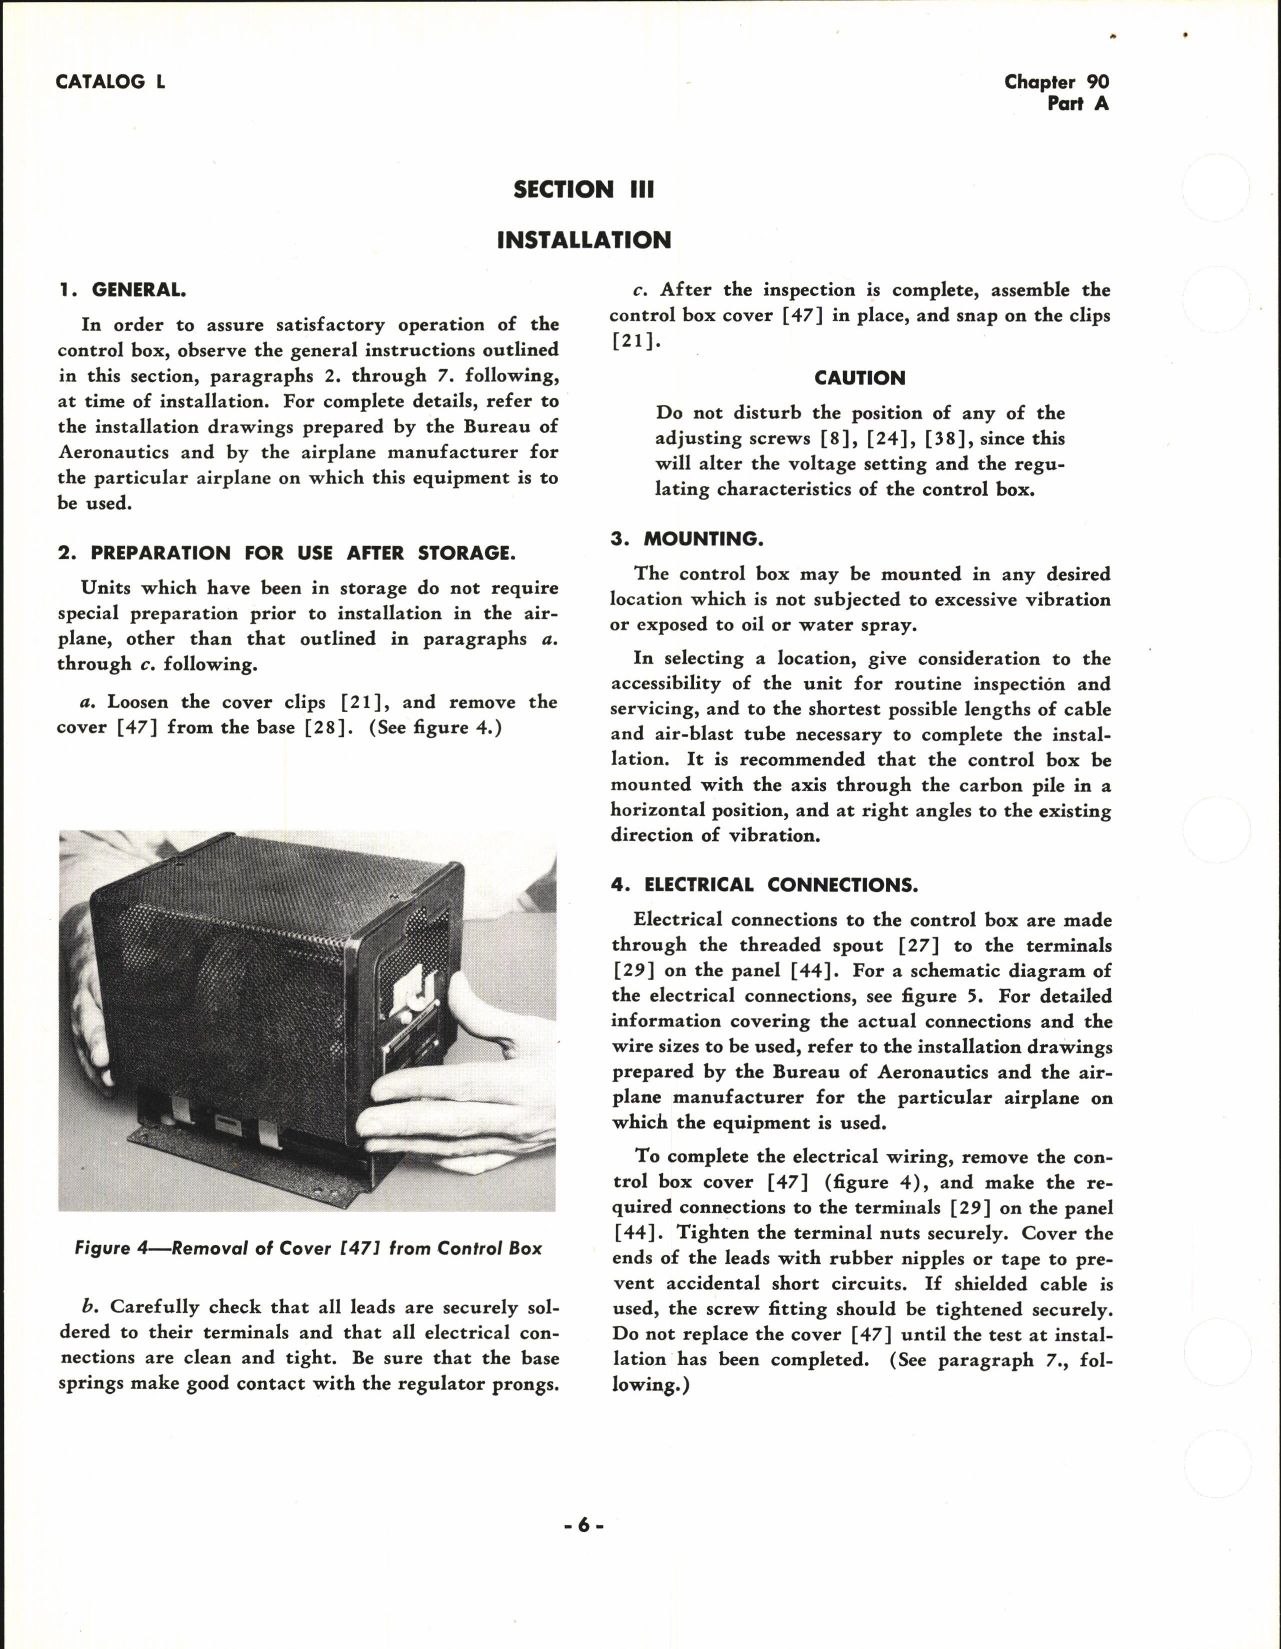 Sample page 6 from AirCorps Library document: Operating and Service Instructions for D-C Carbon Pile Voltage Regulator Control Box Type 1305, Model 1